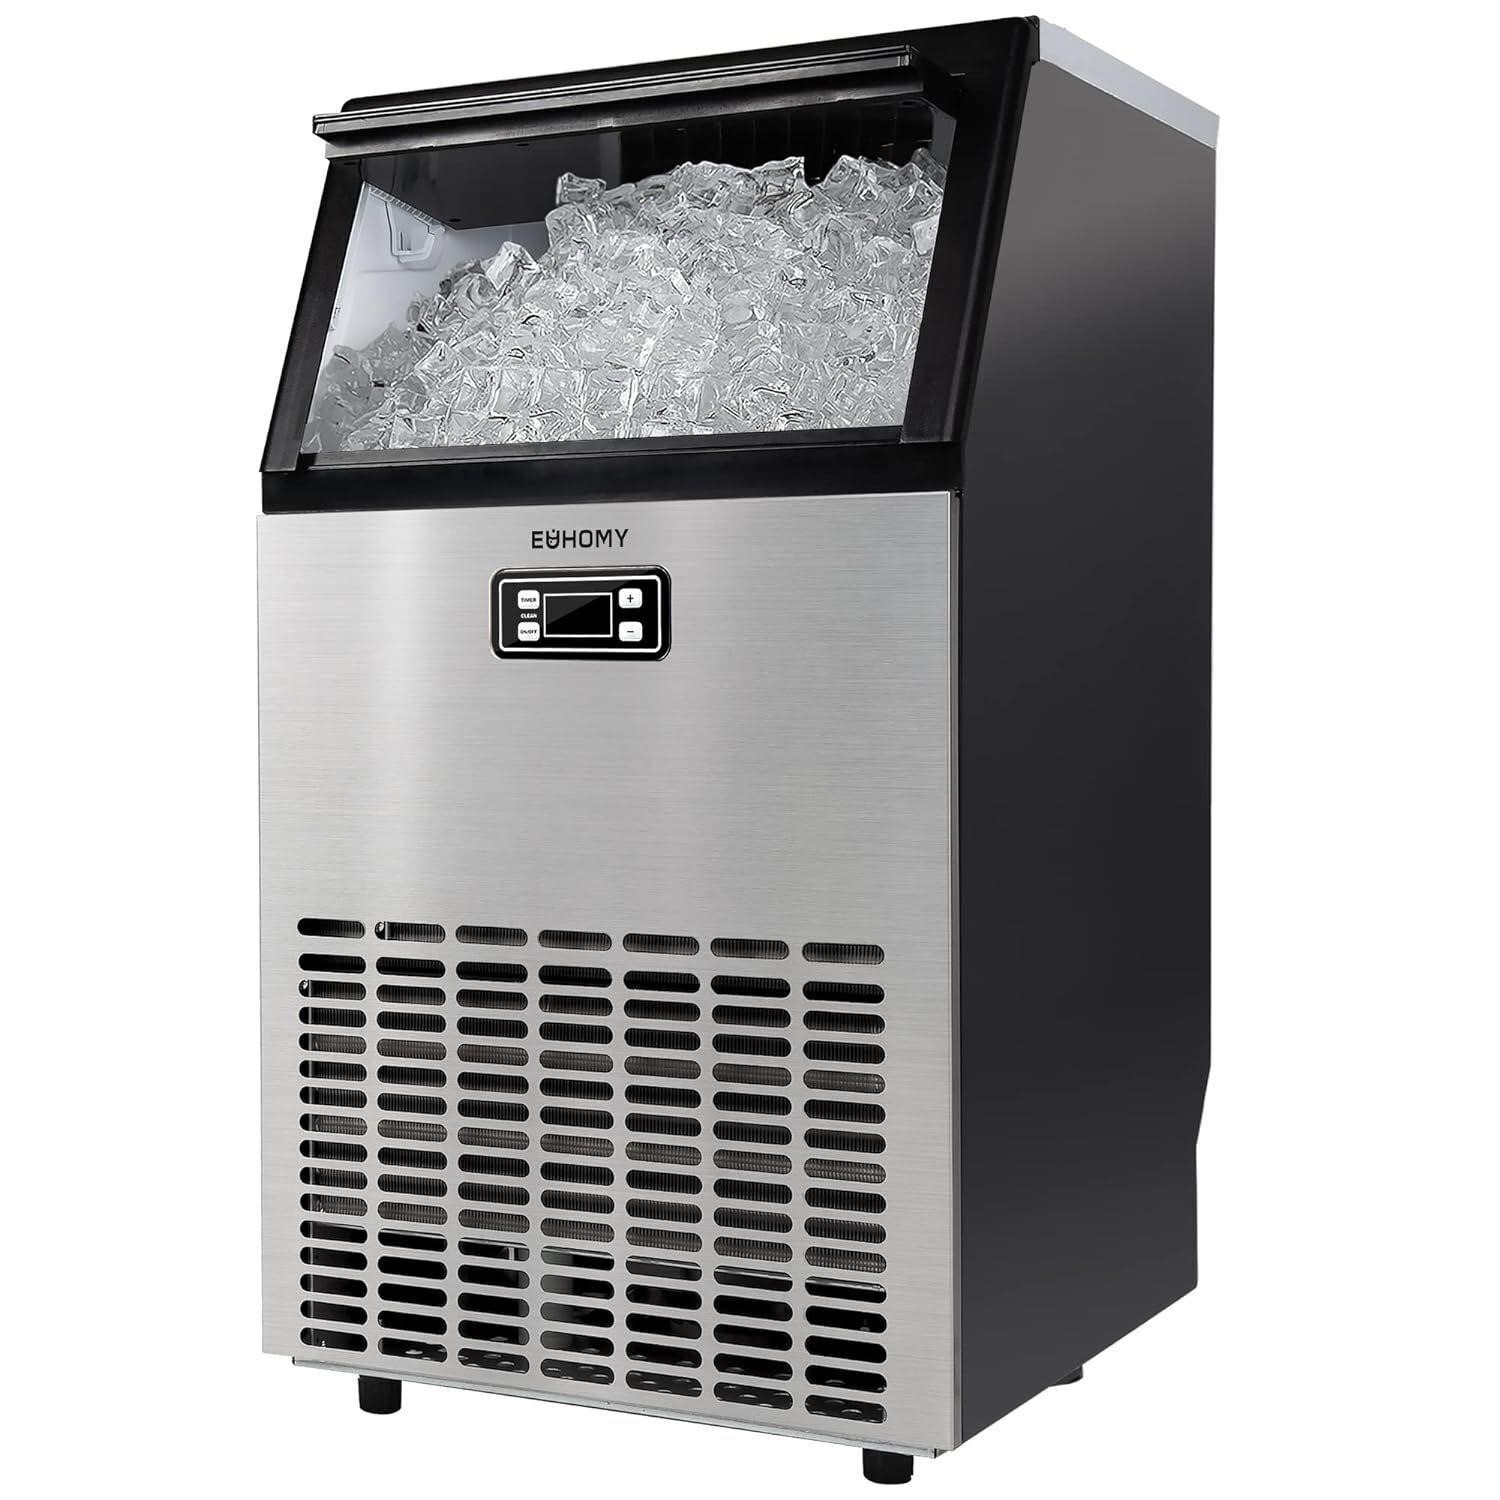 EUHOMY Commercial Ice Maker Machine